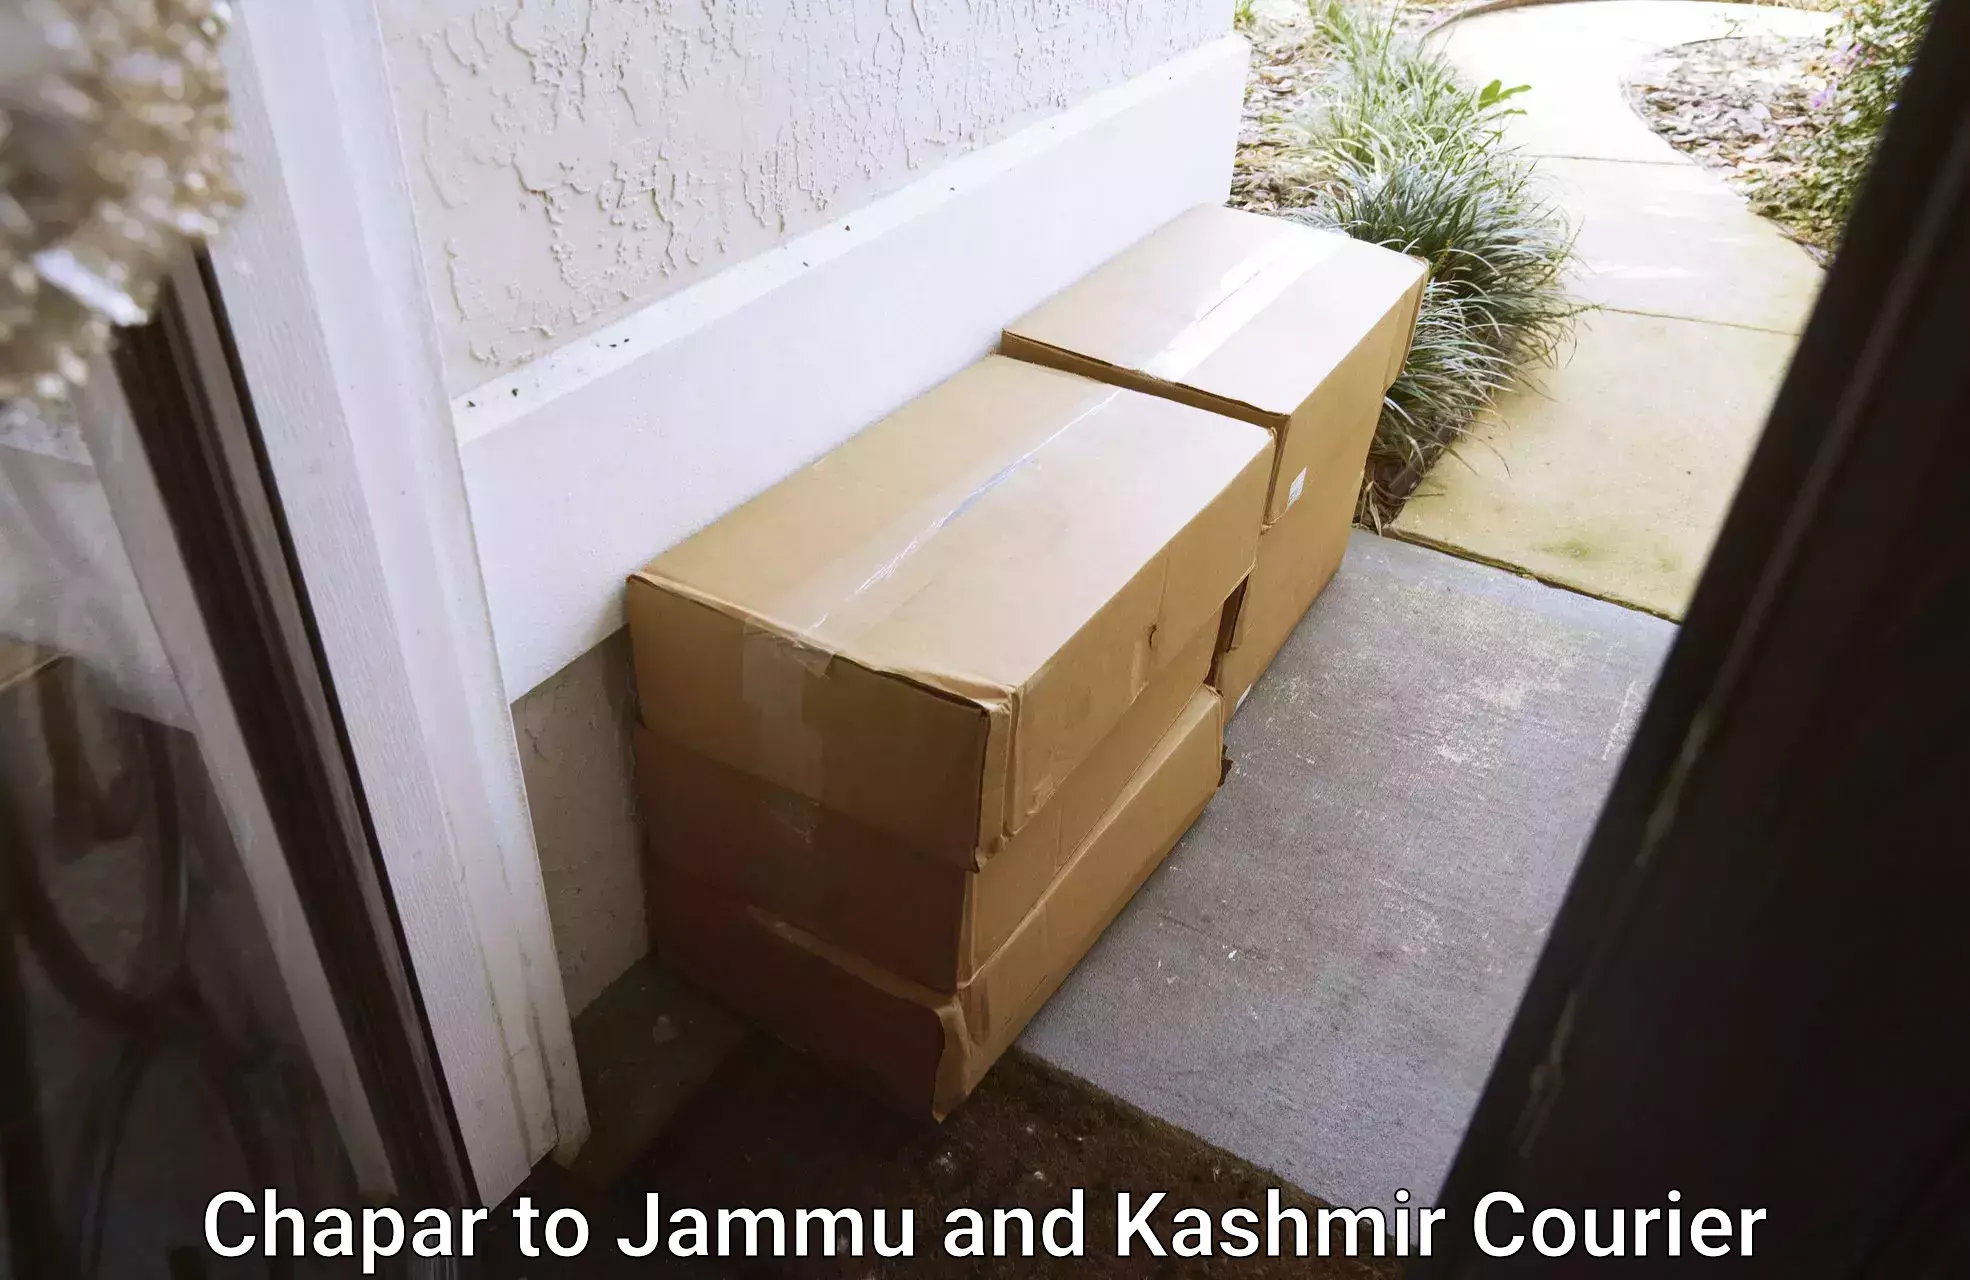 Subscription-based courier Chapar to Baramulla